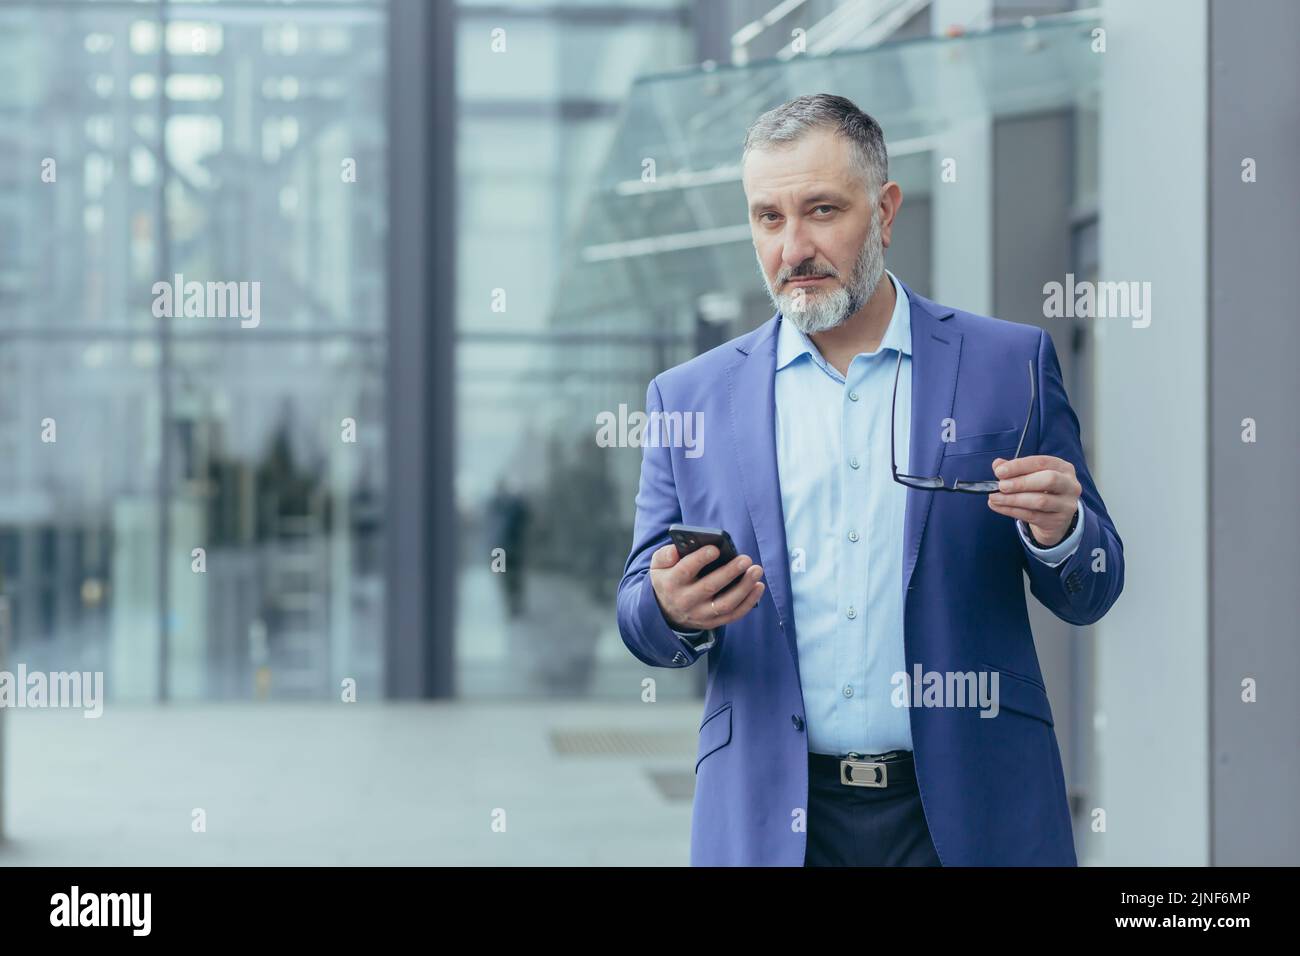 Portrait of senior gray-haired financier, man outside office building holding phone and looking at camera, businessman walking Stock Photo